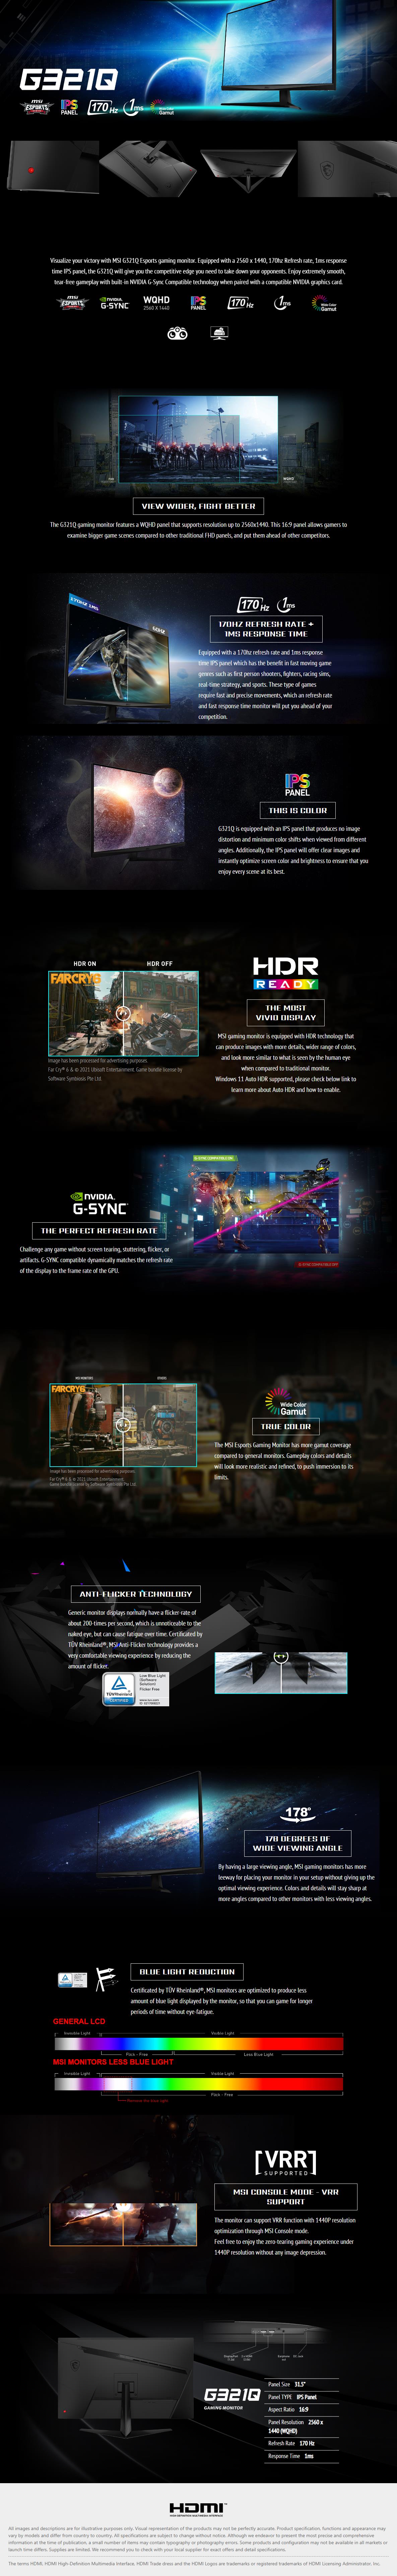 A large marketing image providing additional information about the product MSI G321Q 31.5" QHD 170Hz IPS Monitor - Additional alt info not provided